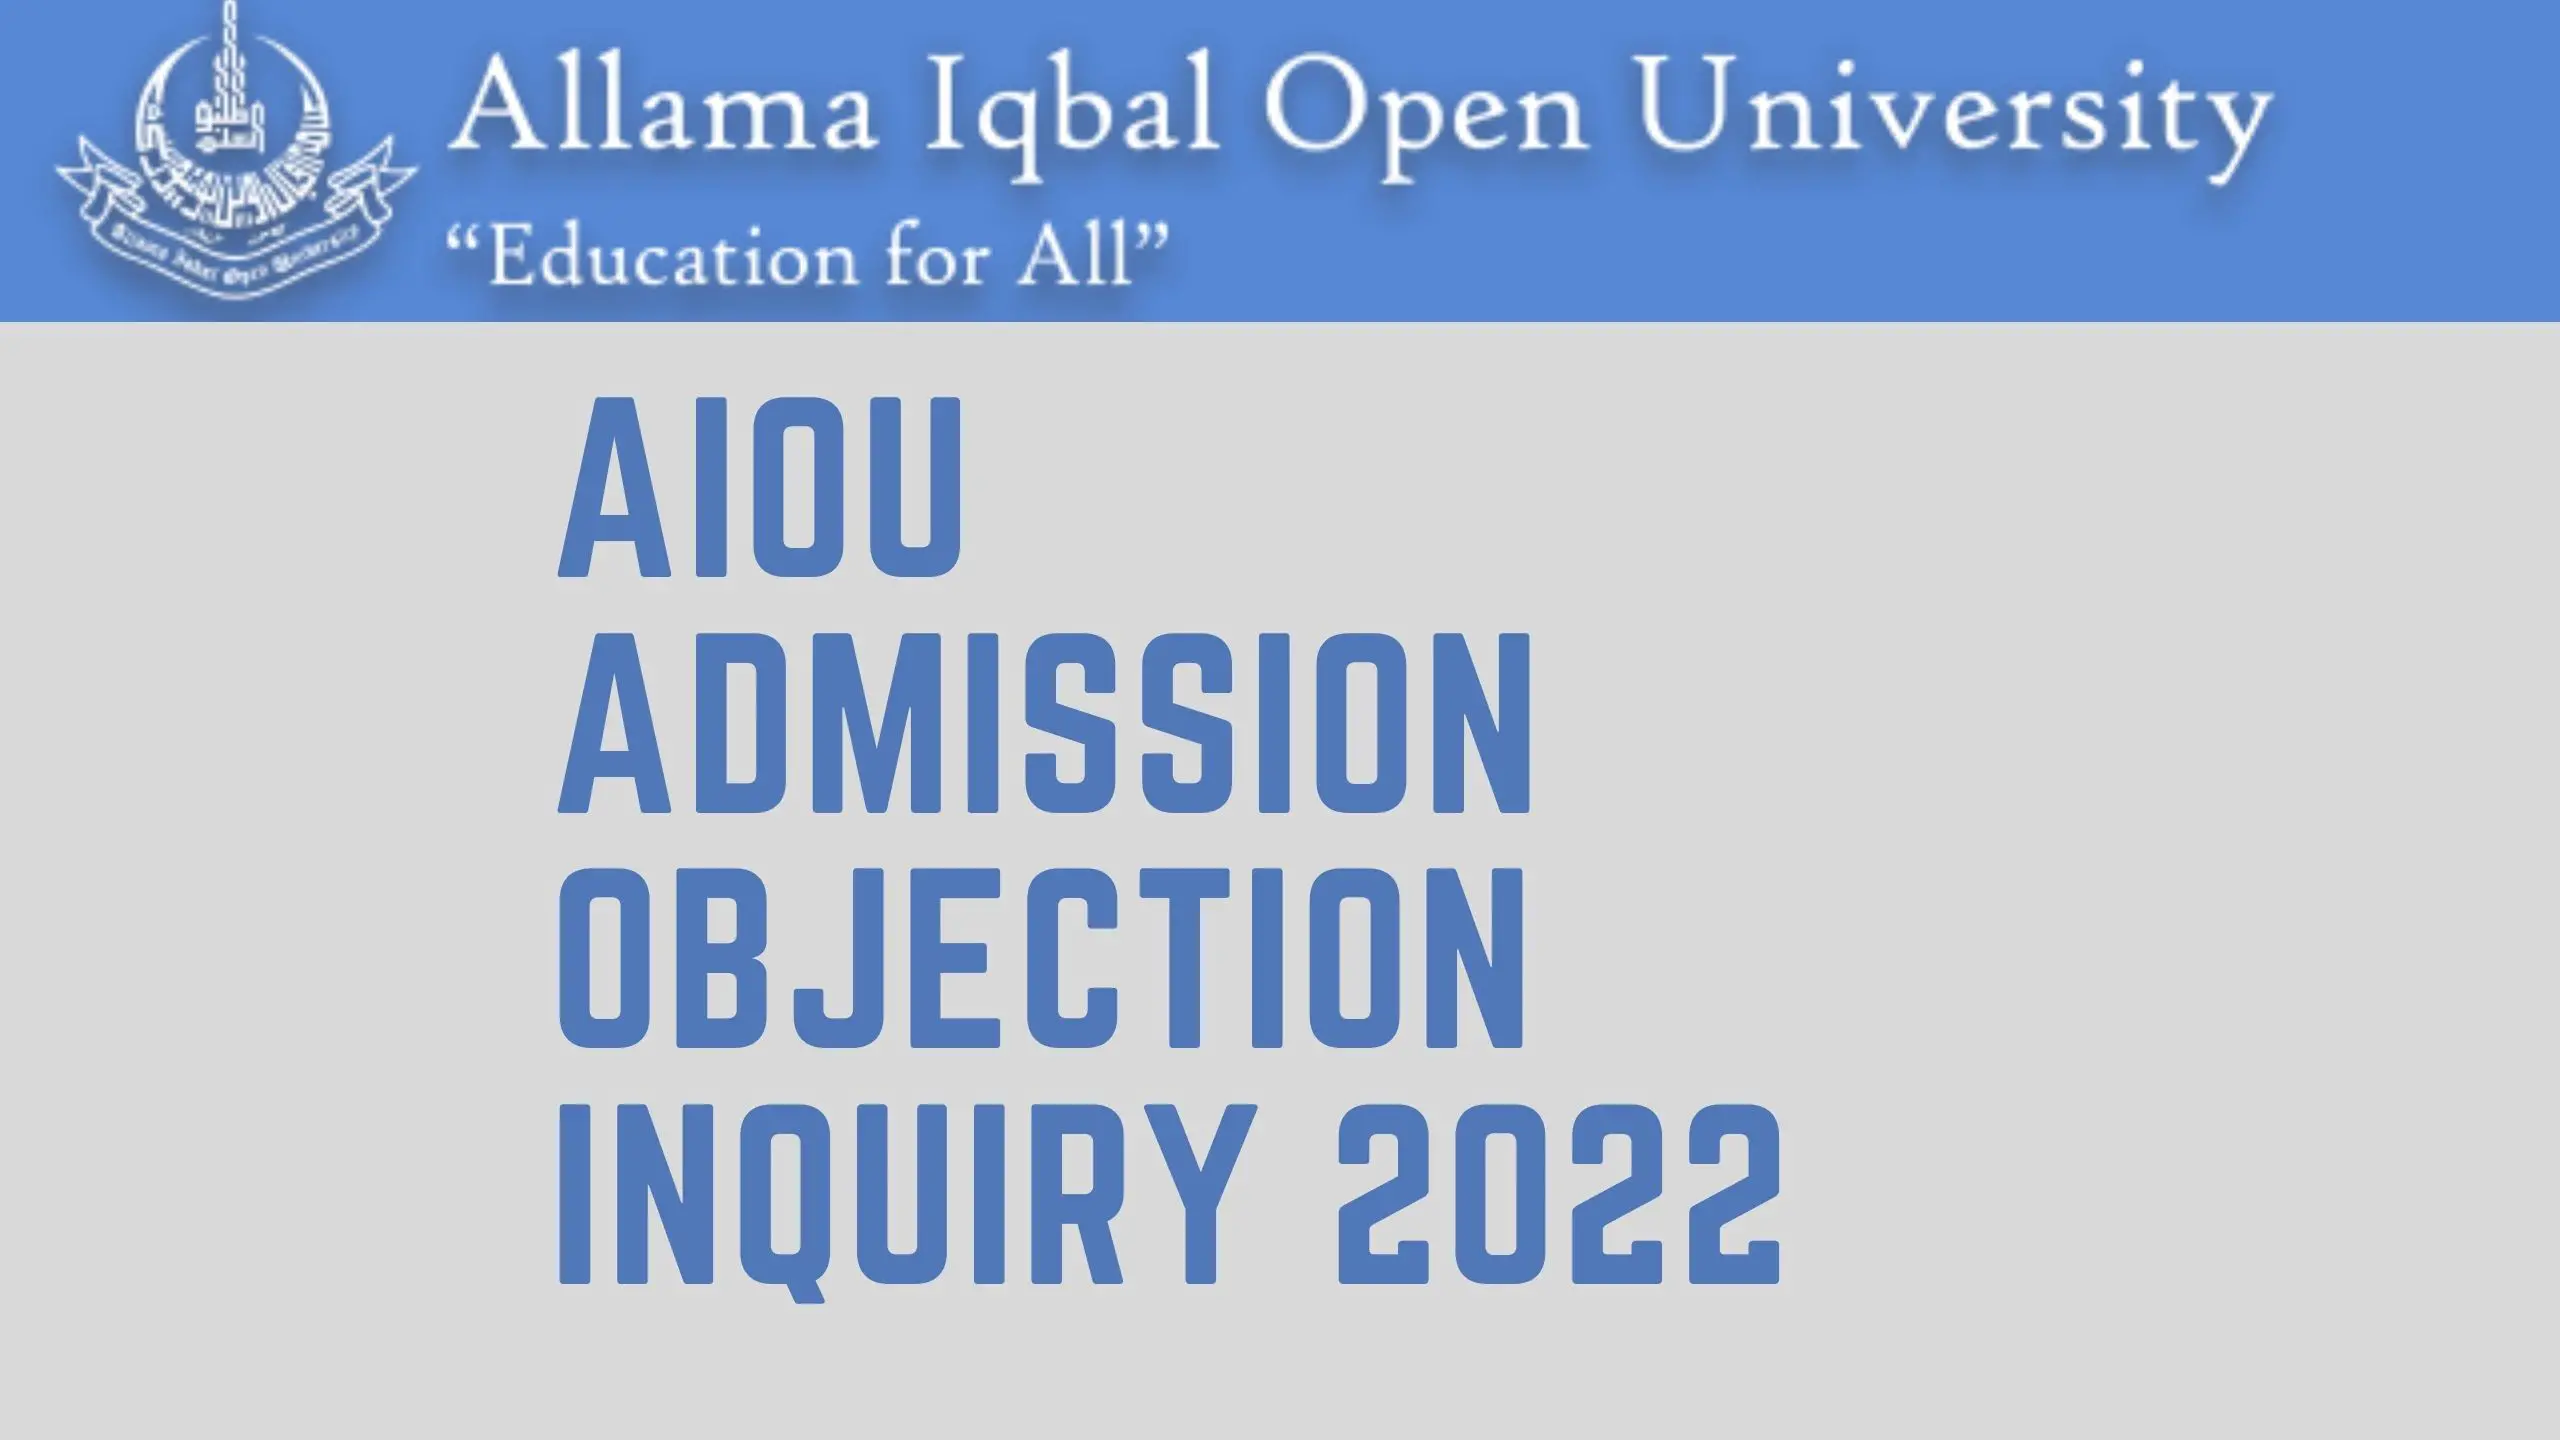 AIOU Admission Objection Inquiry